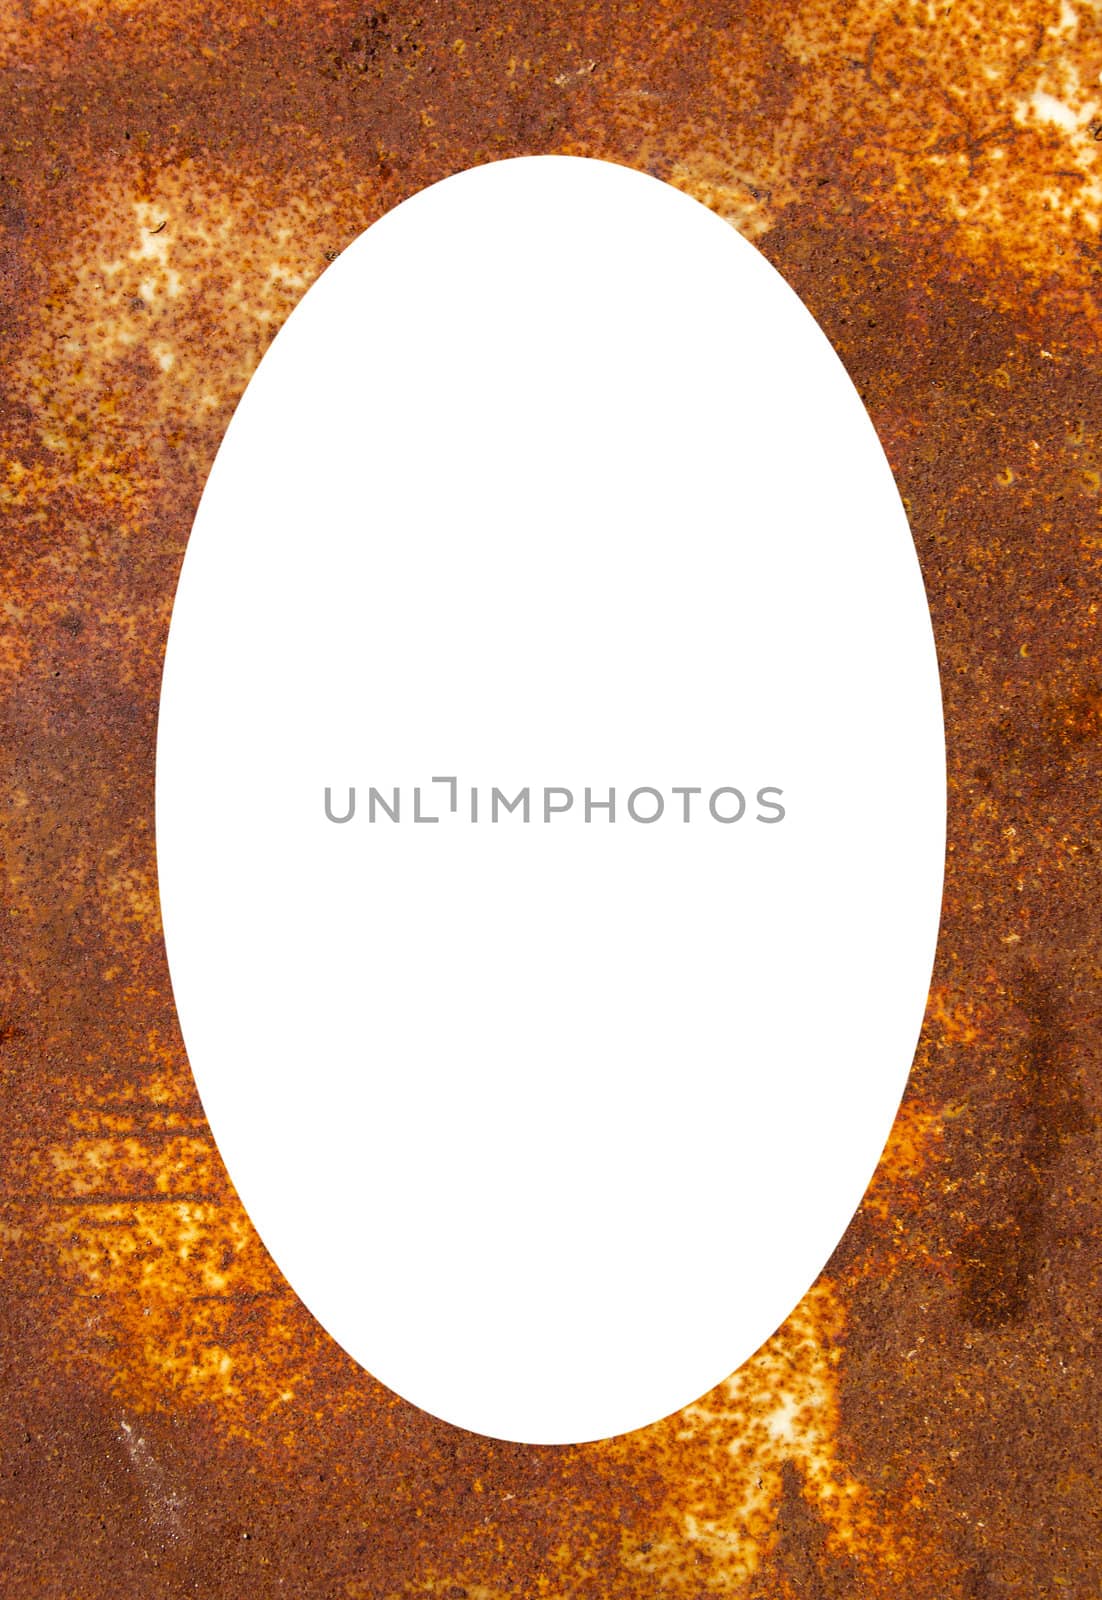 Rusty tin background and white oval in center by sauletas